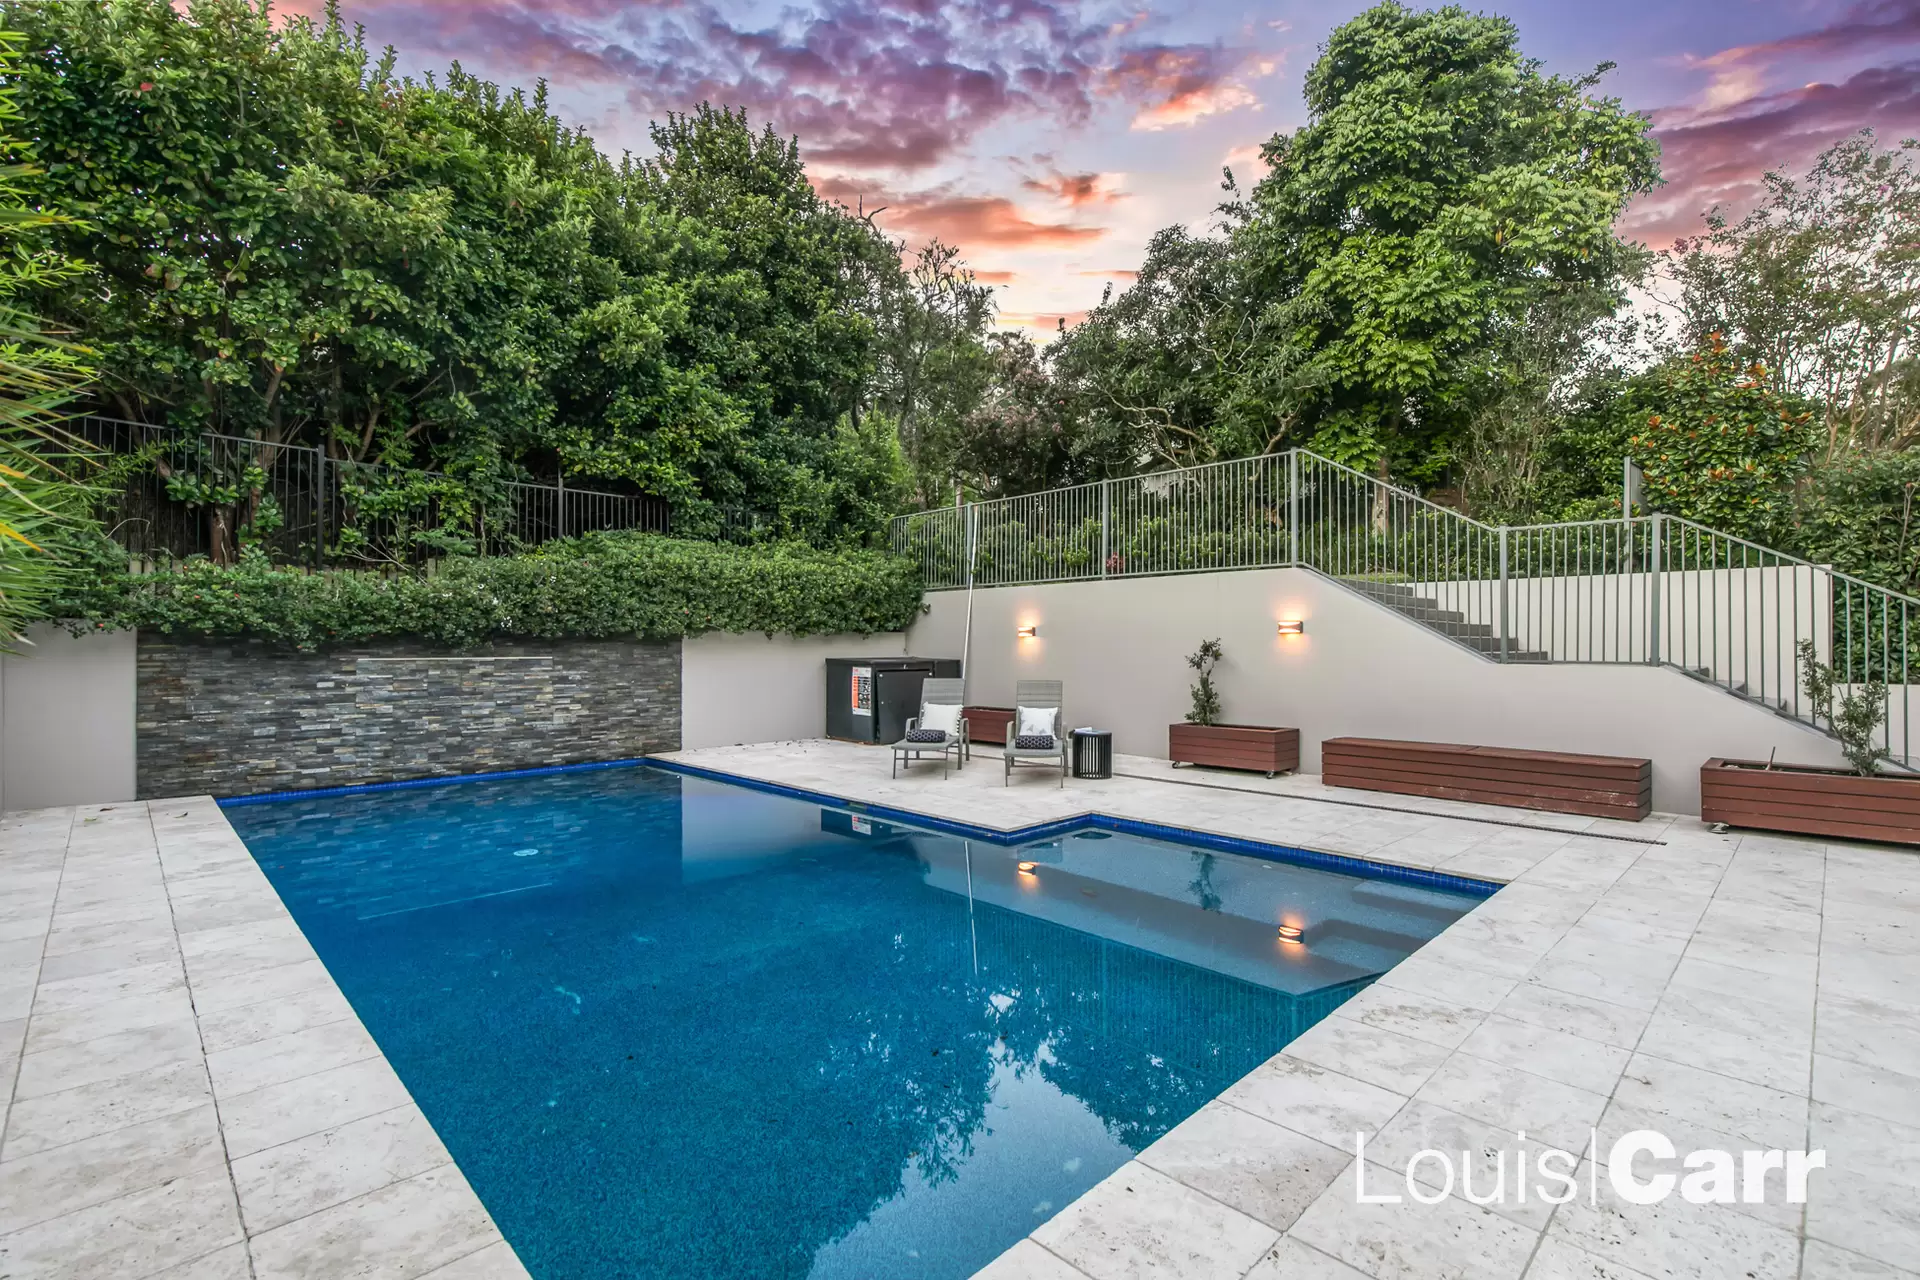 Photo #14: 151 Oratava Avenue, West Pennant Hills - Sold by Louis Carr Real Estate